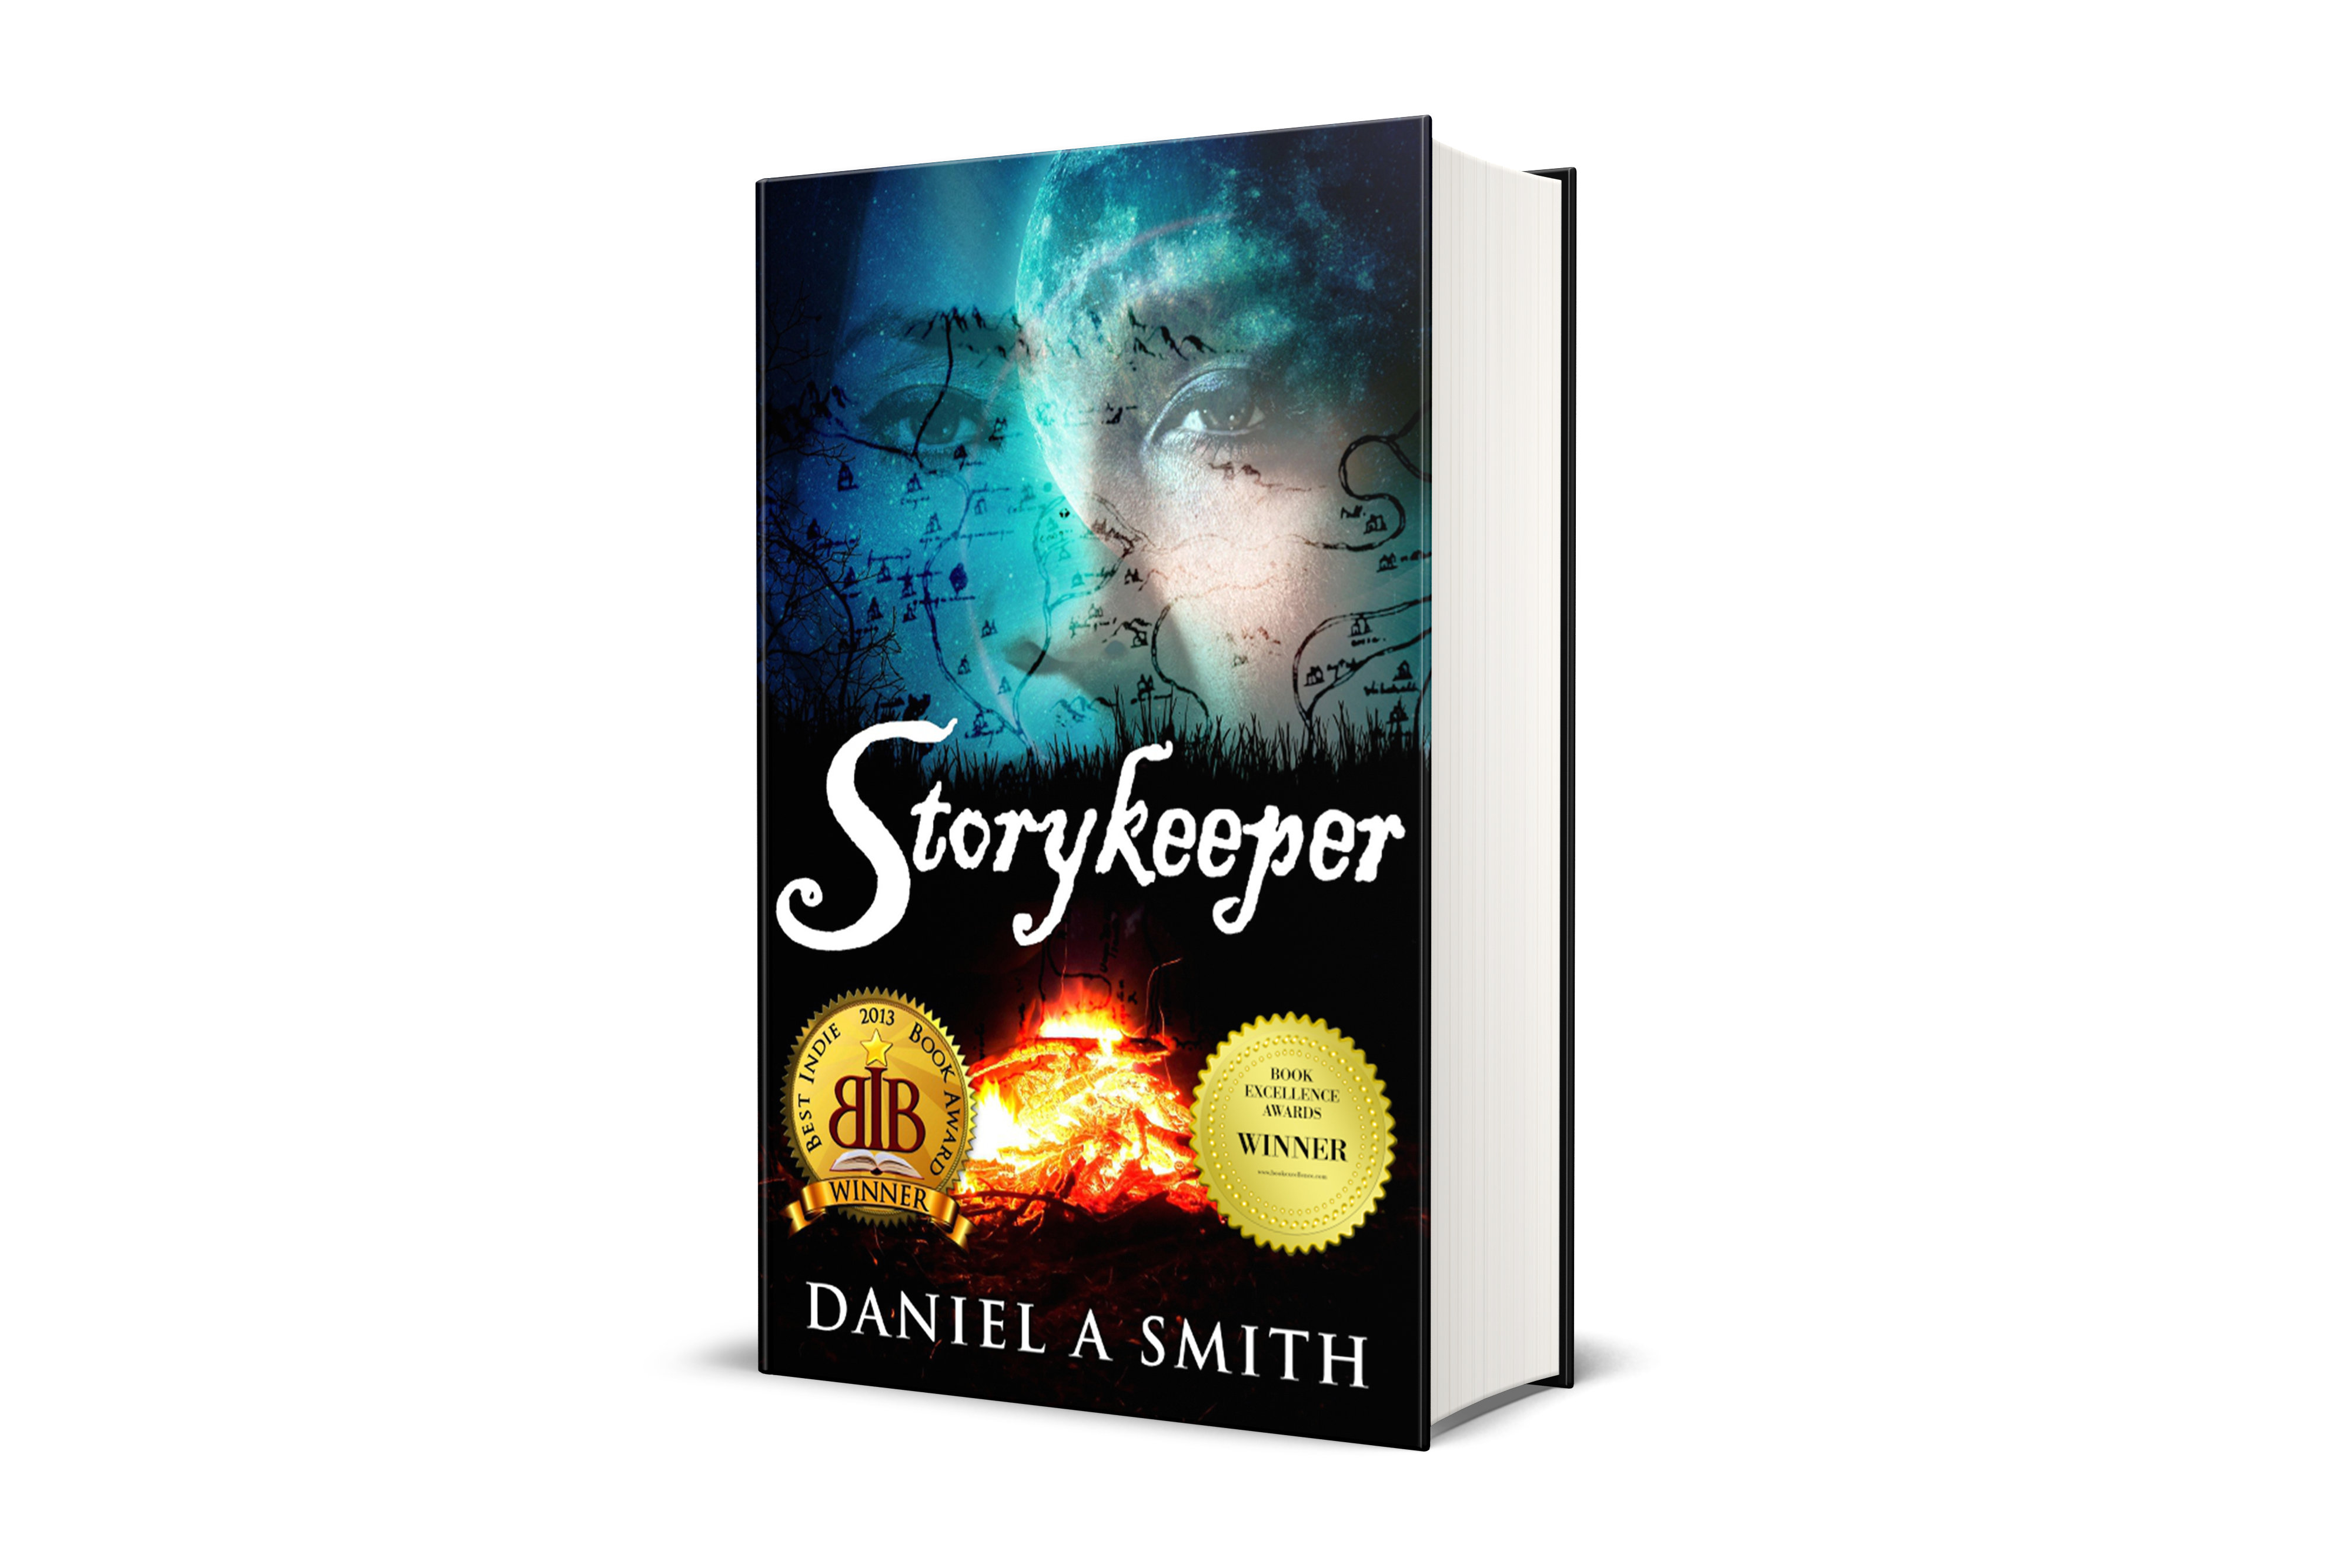 Daniel A. Smith’s, Storykeeper, Recognized as a Winner in International Book Contest